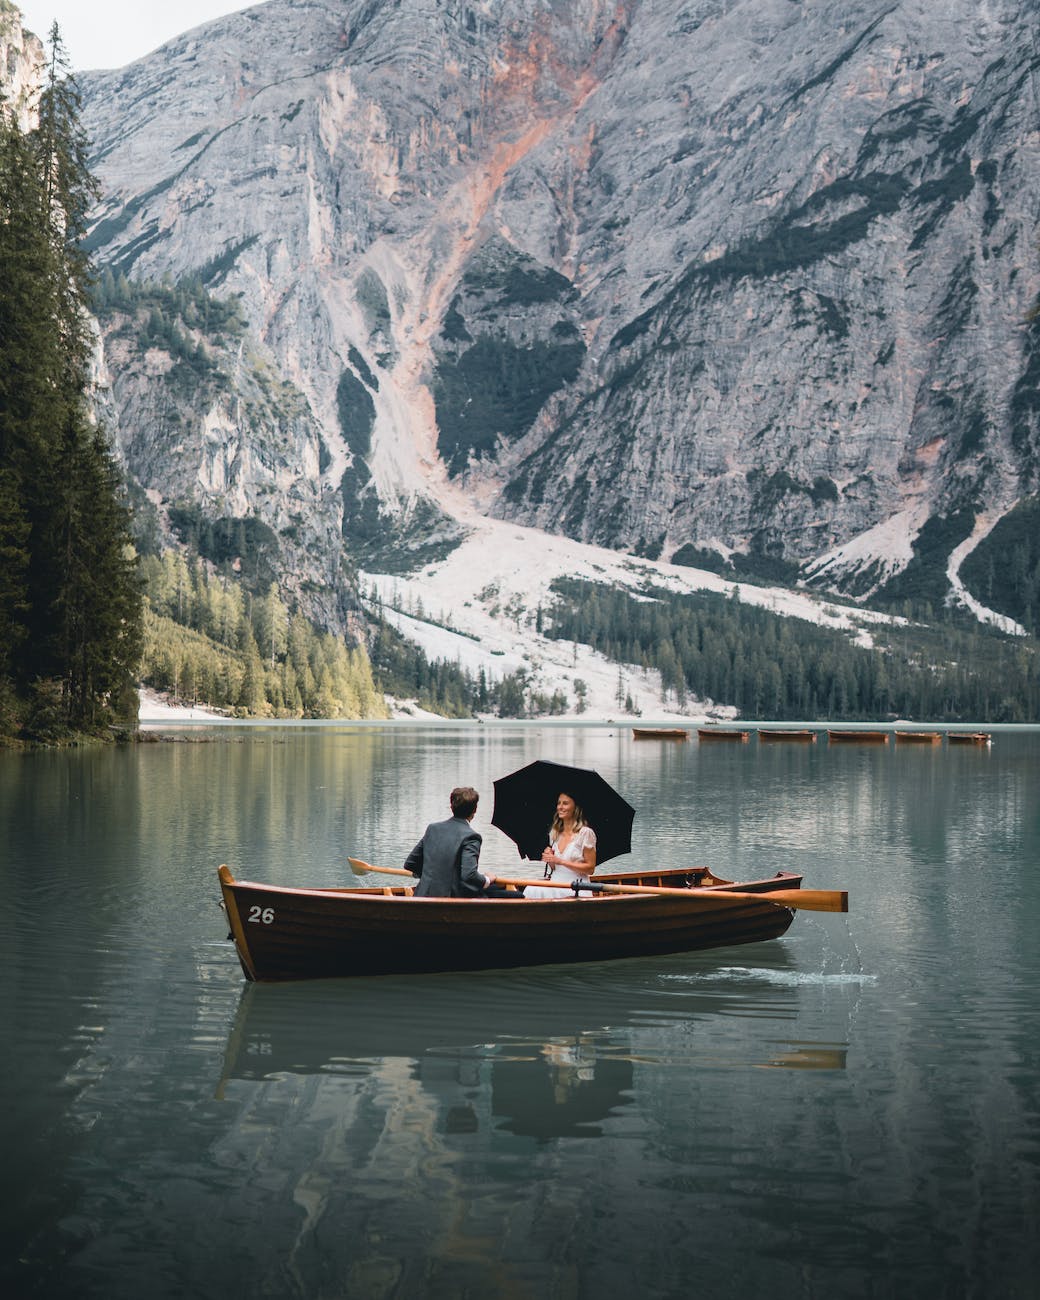 man and woman riding a boat